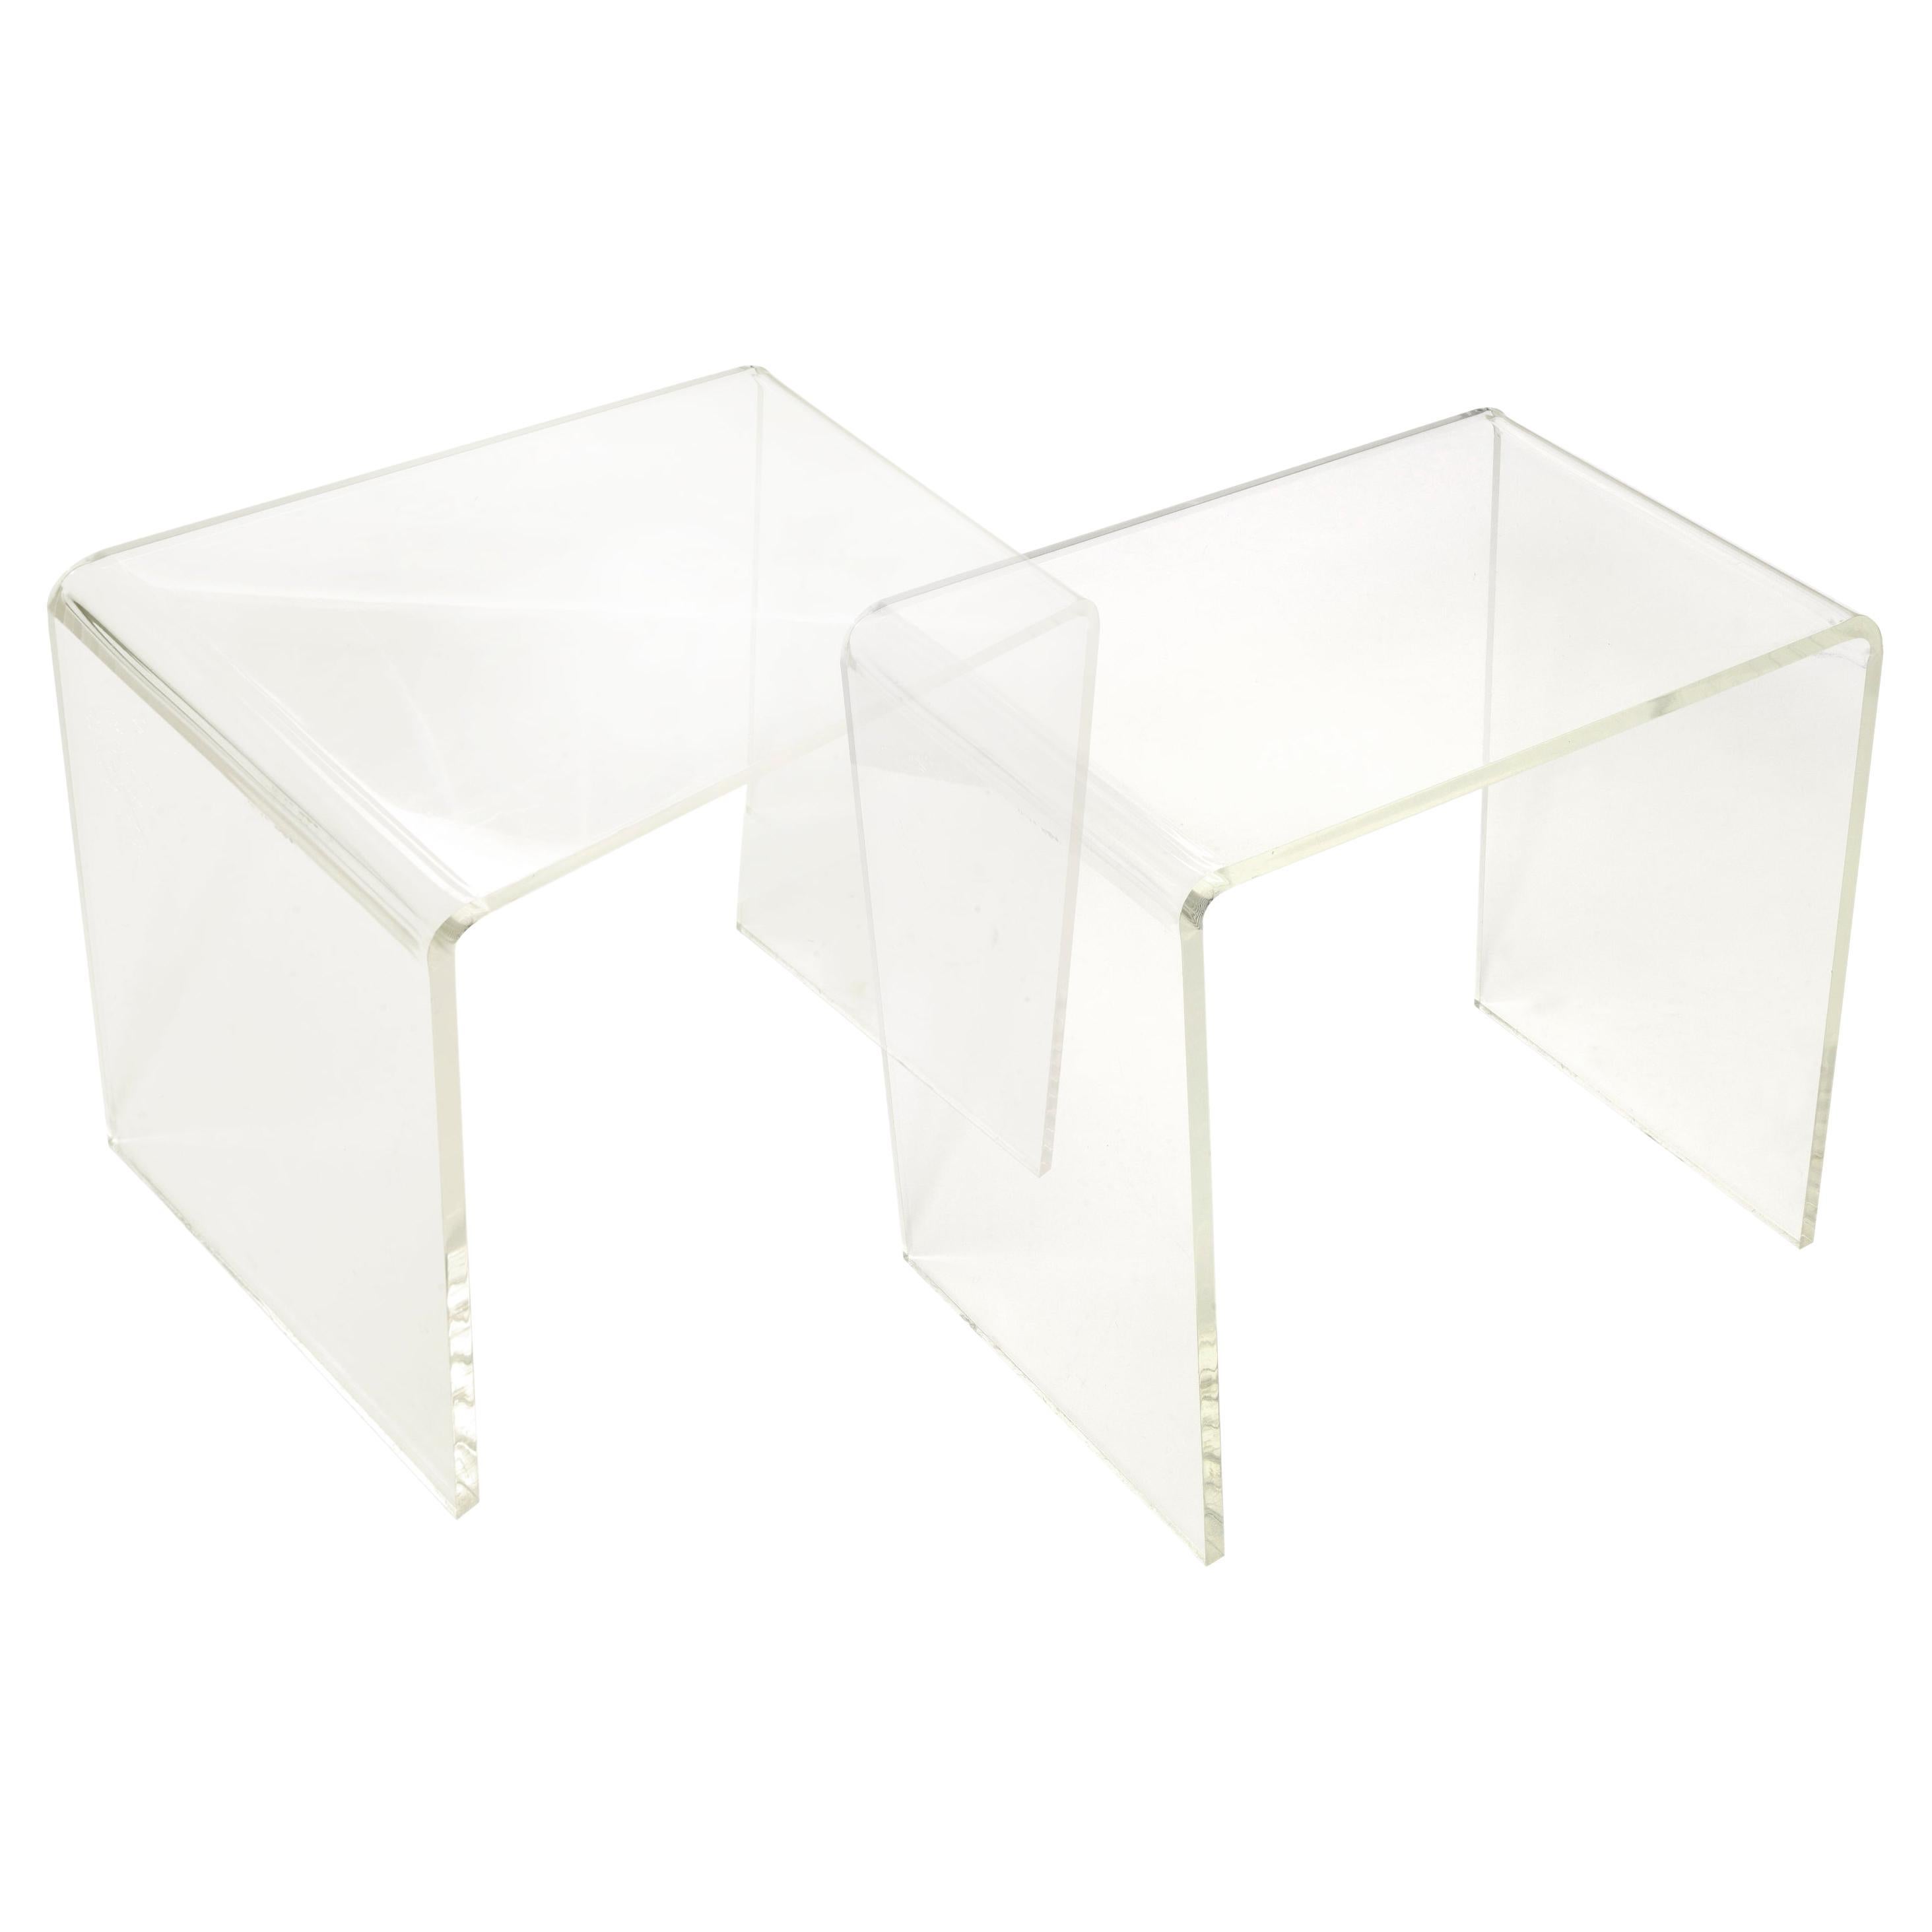 1960s Mid-Century Lucite Waterfall Tables - a Pair 